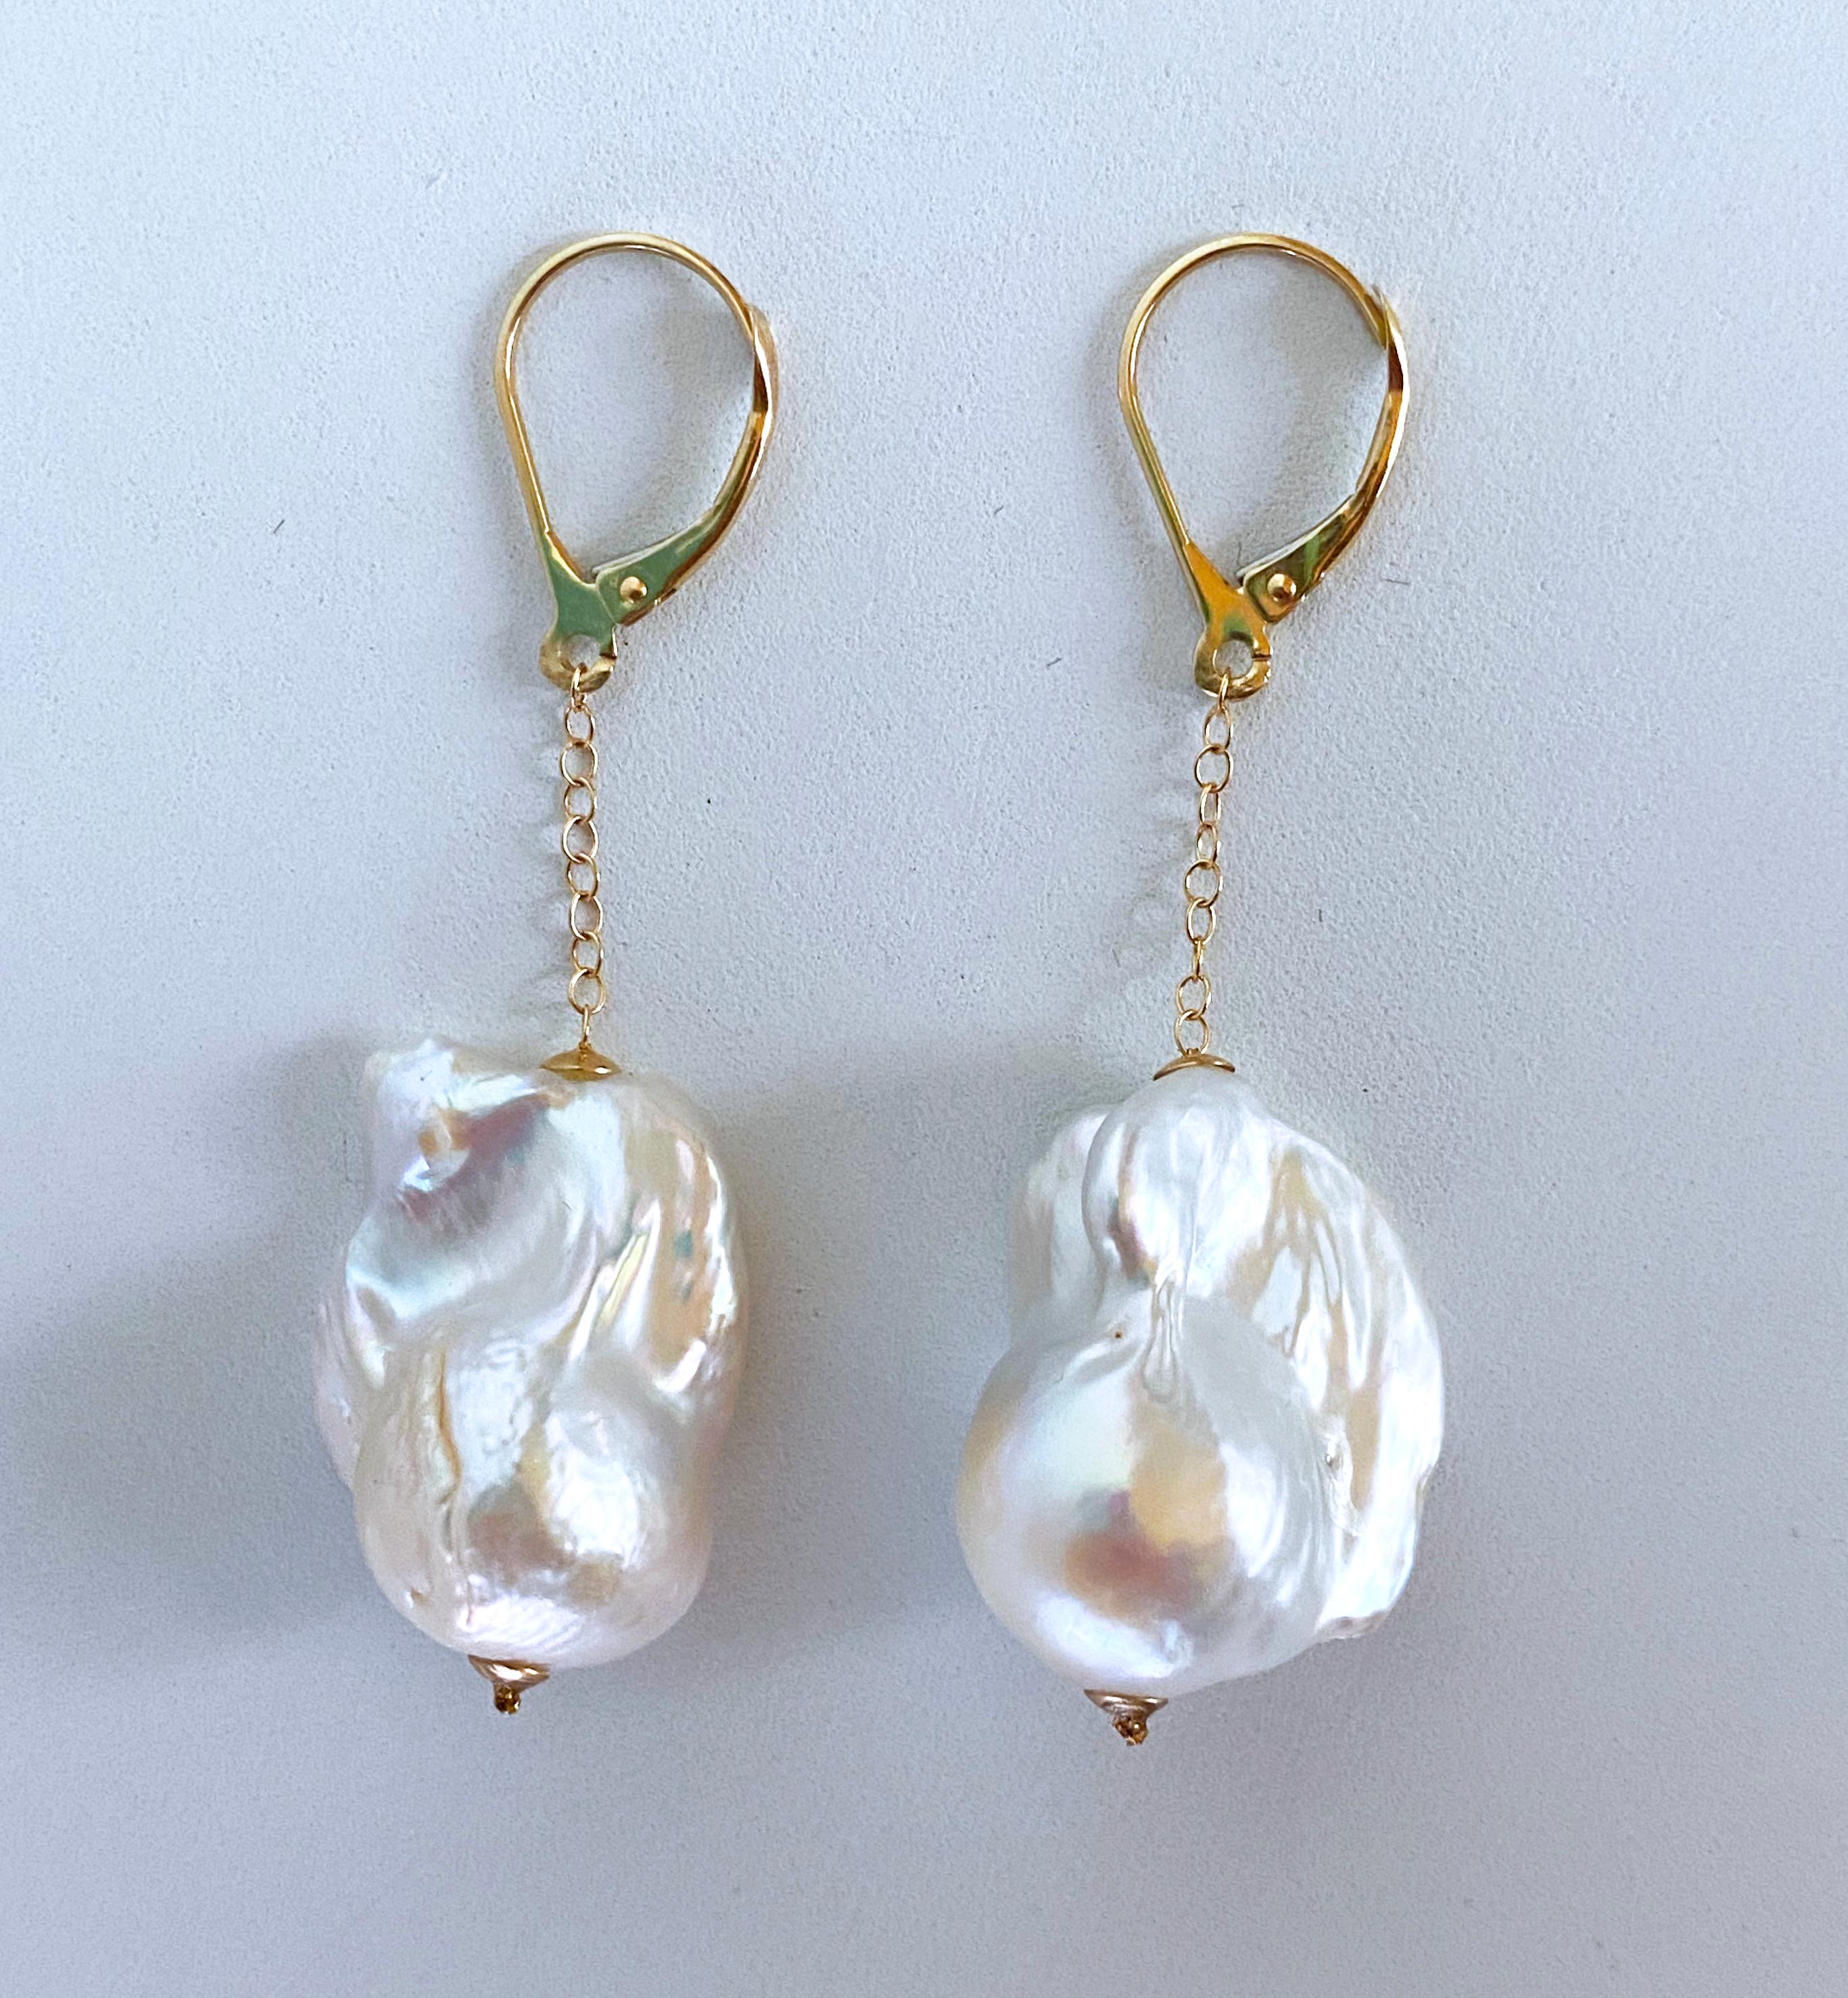 Beautiful pair of Earrings by Marina J. This pair is made of two cultured Baroque Pearls displaying a fine iridescent luster which flash soft hues of pinks, blues, greens and purples. The Baroque Pearls sit within two small solid 14k Yellow Gold